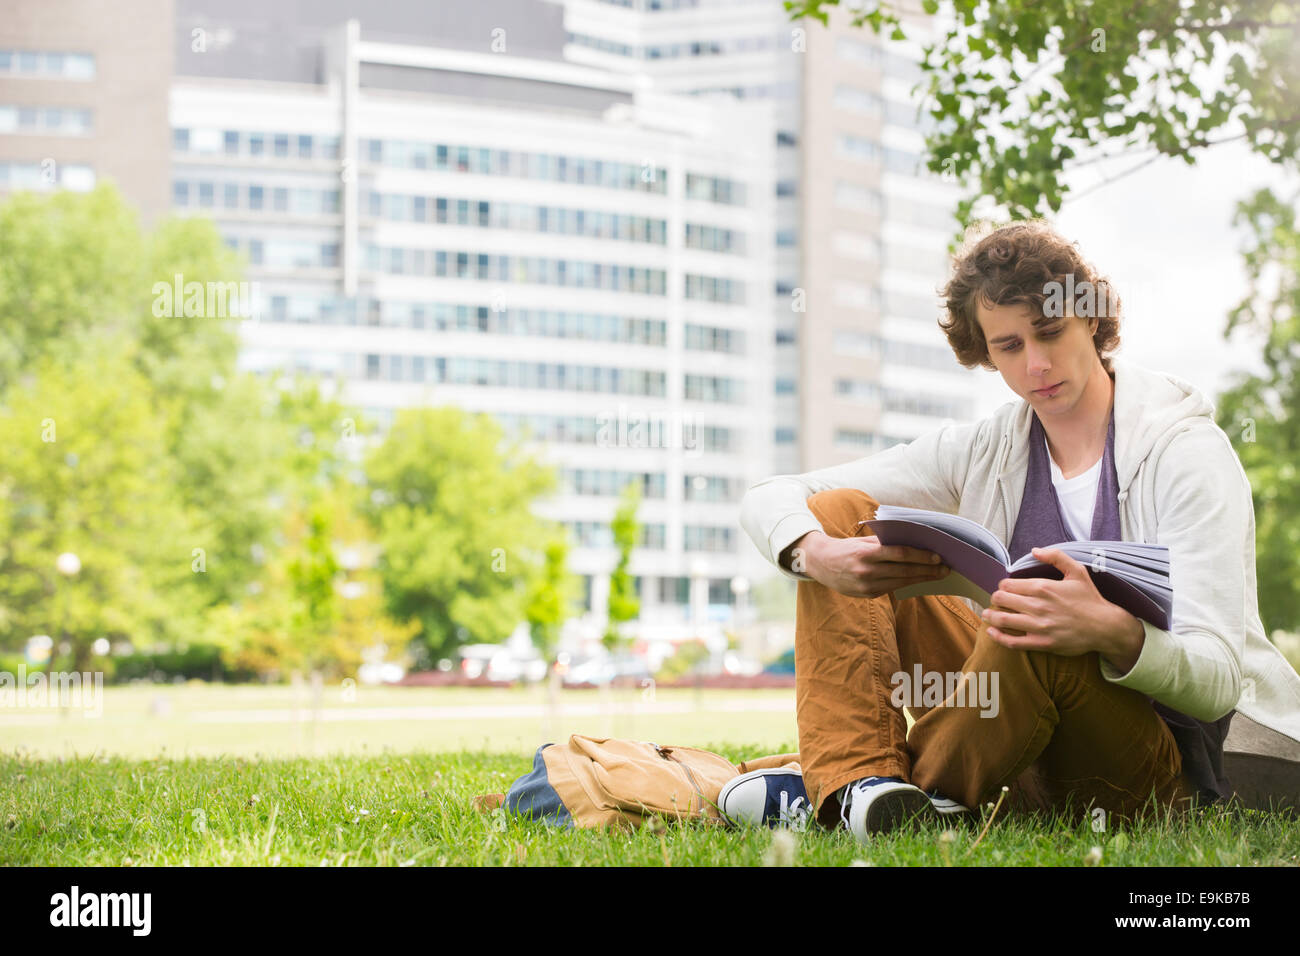 Full length of young man reading book on college campus Stock Photo